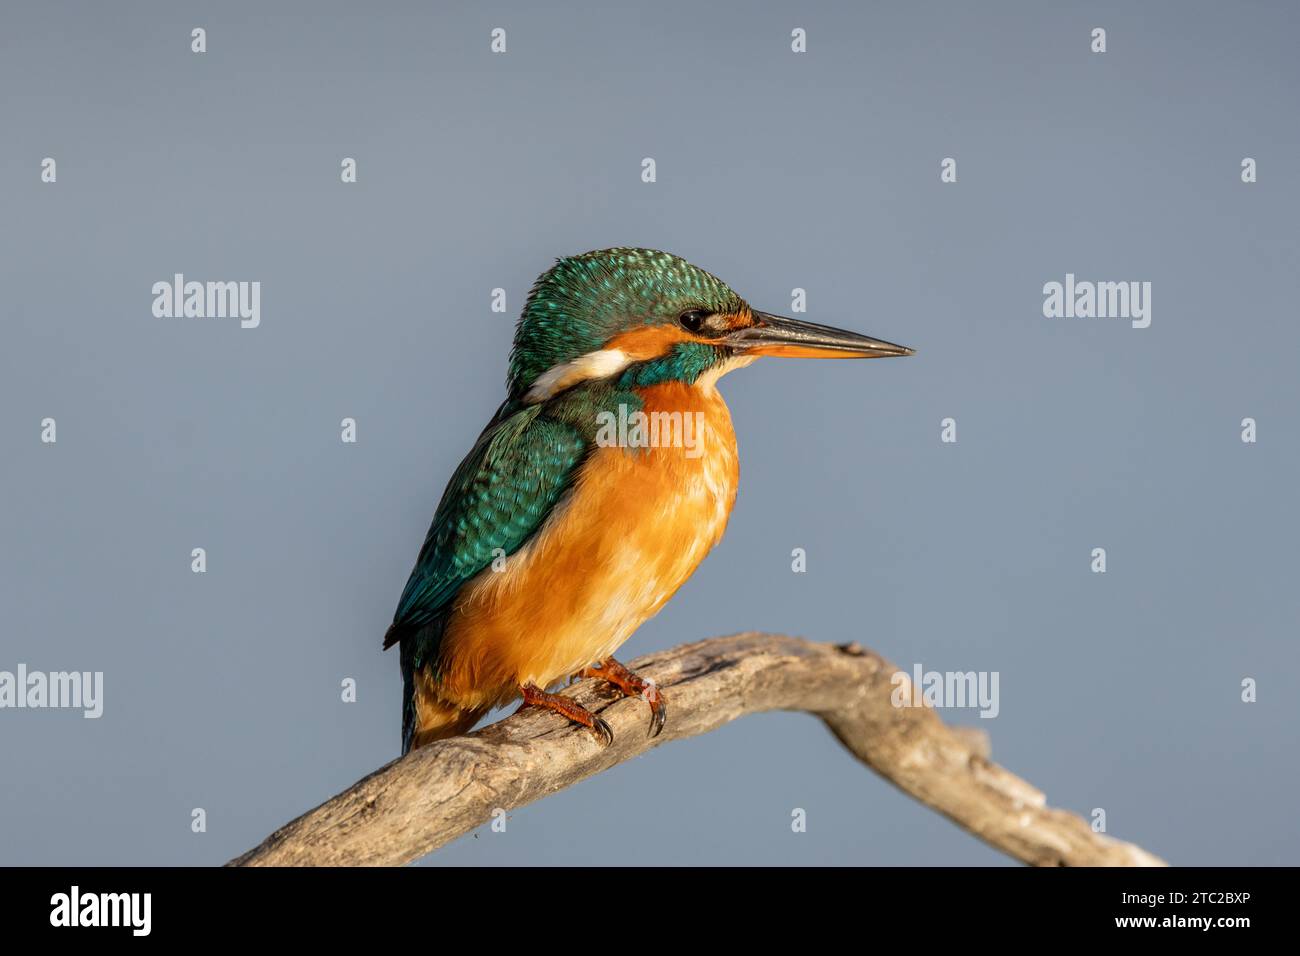 The beauty of the kingfisher in Cabras, Sardinia Stock Photo